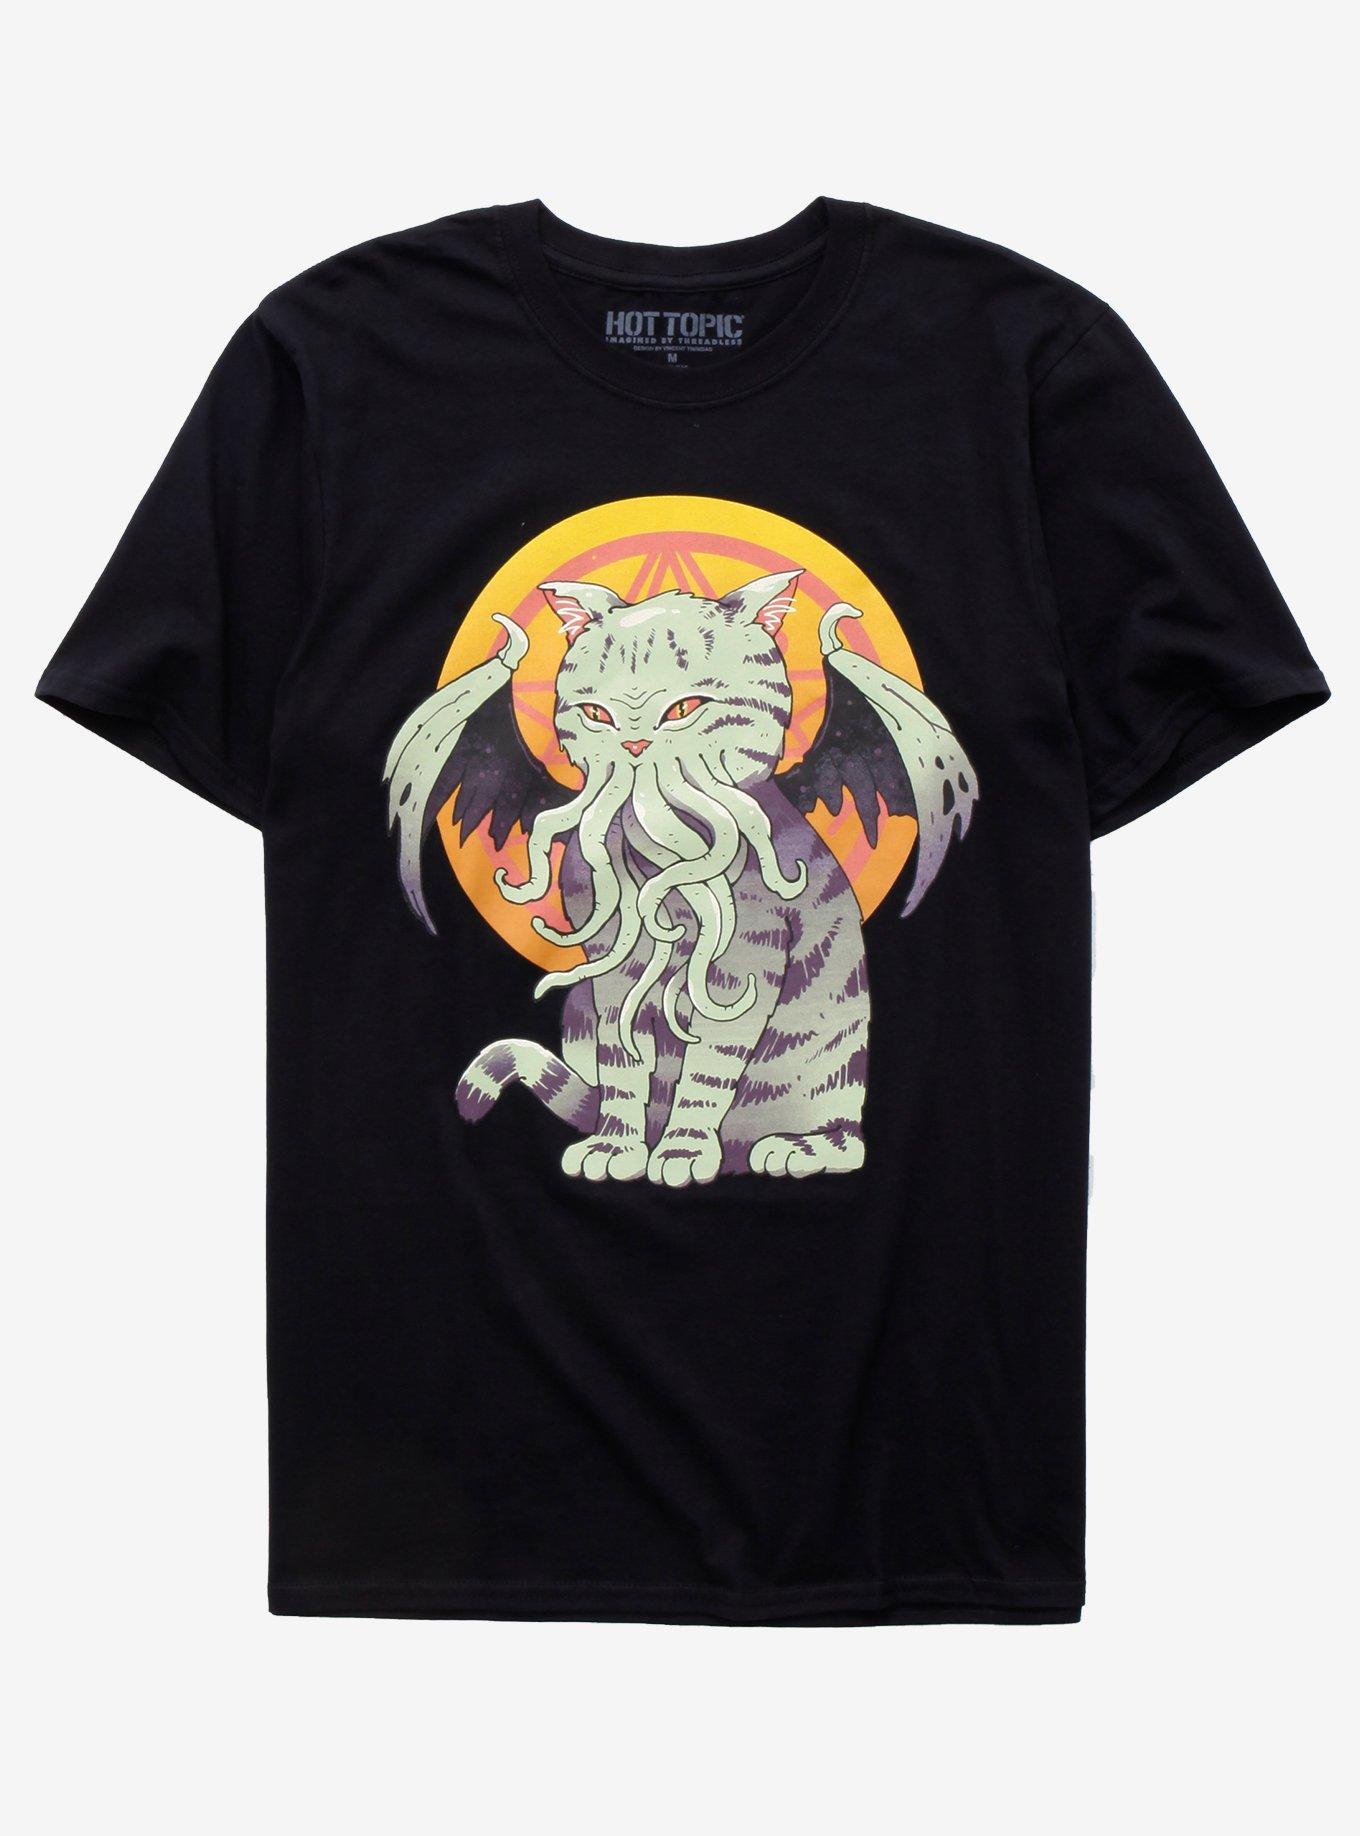 Cathulhu T-Shirt By Vincent Trinidad | Hot Topic